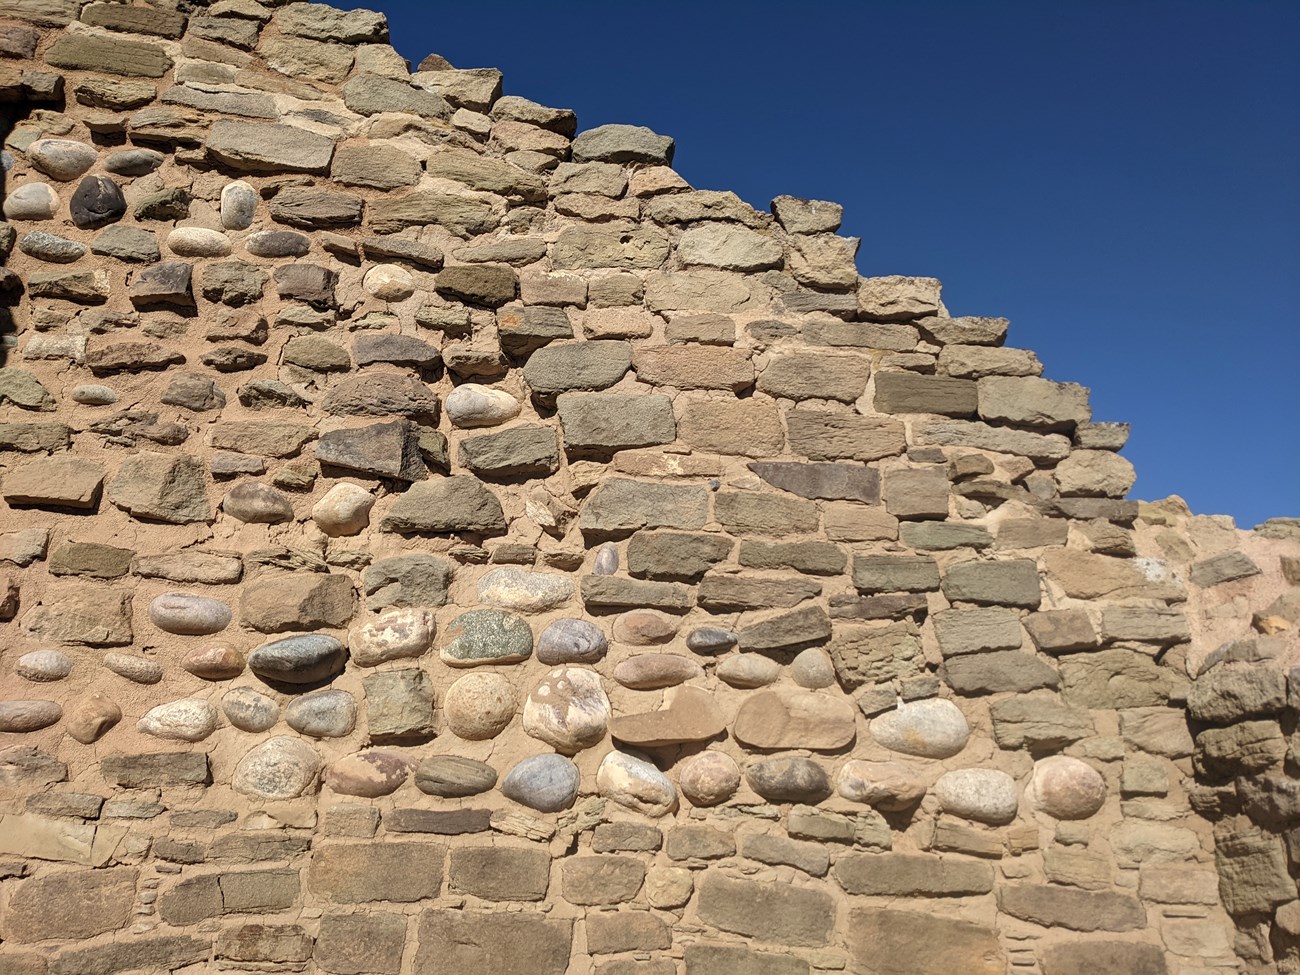 A wall at Aztec East, with both sandstone bricks and cobblestones visible.